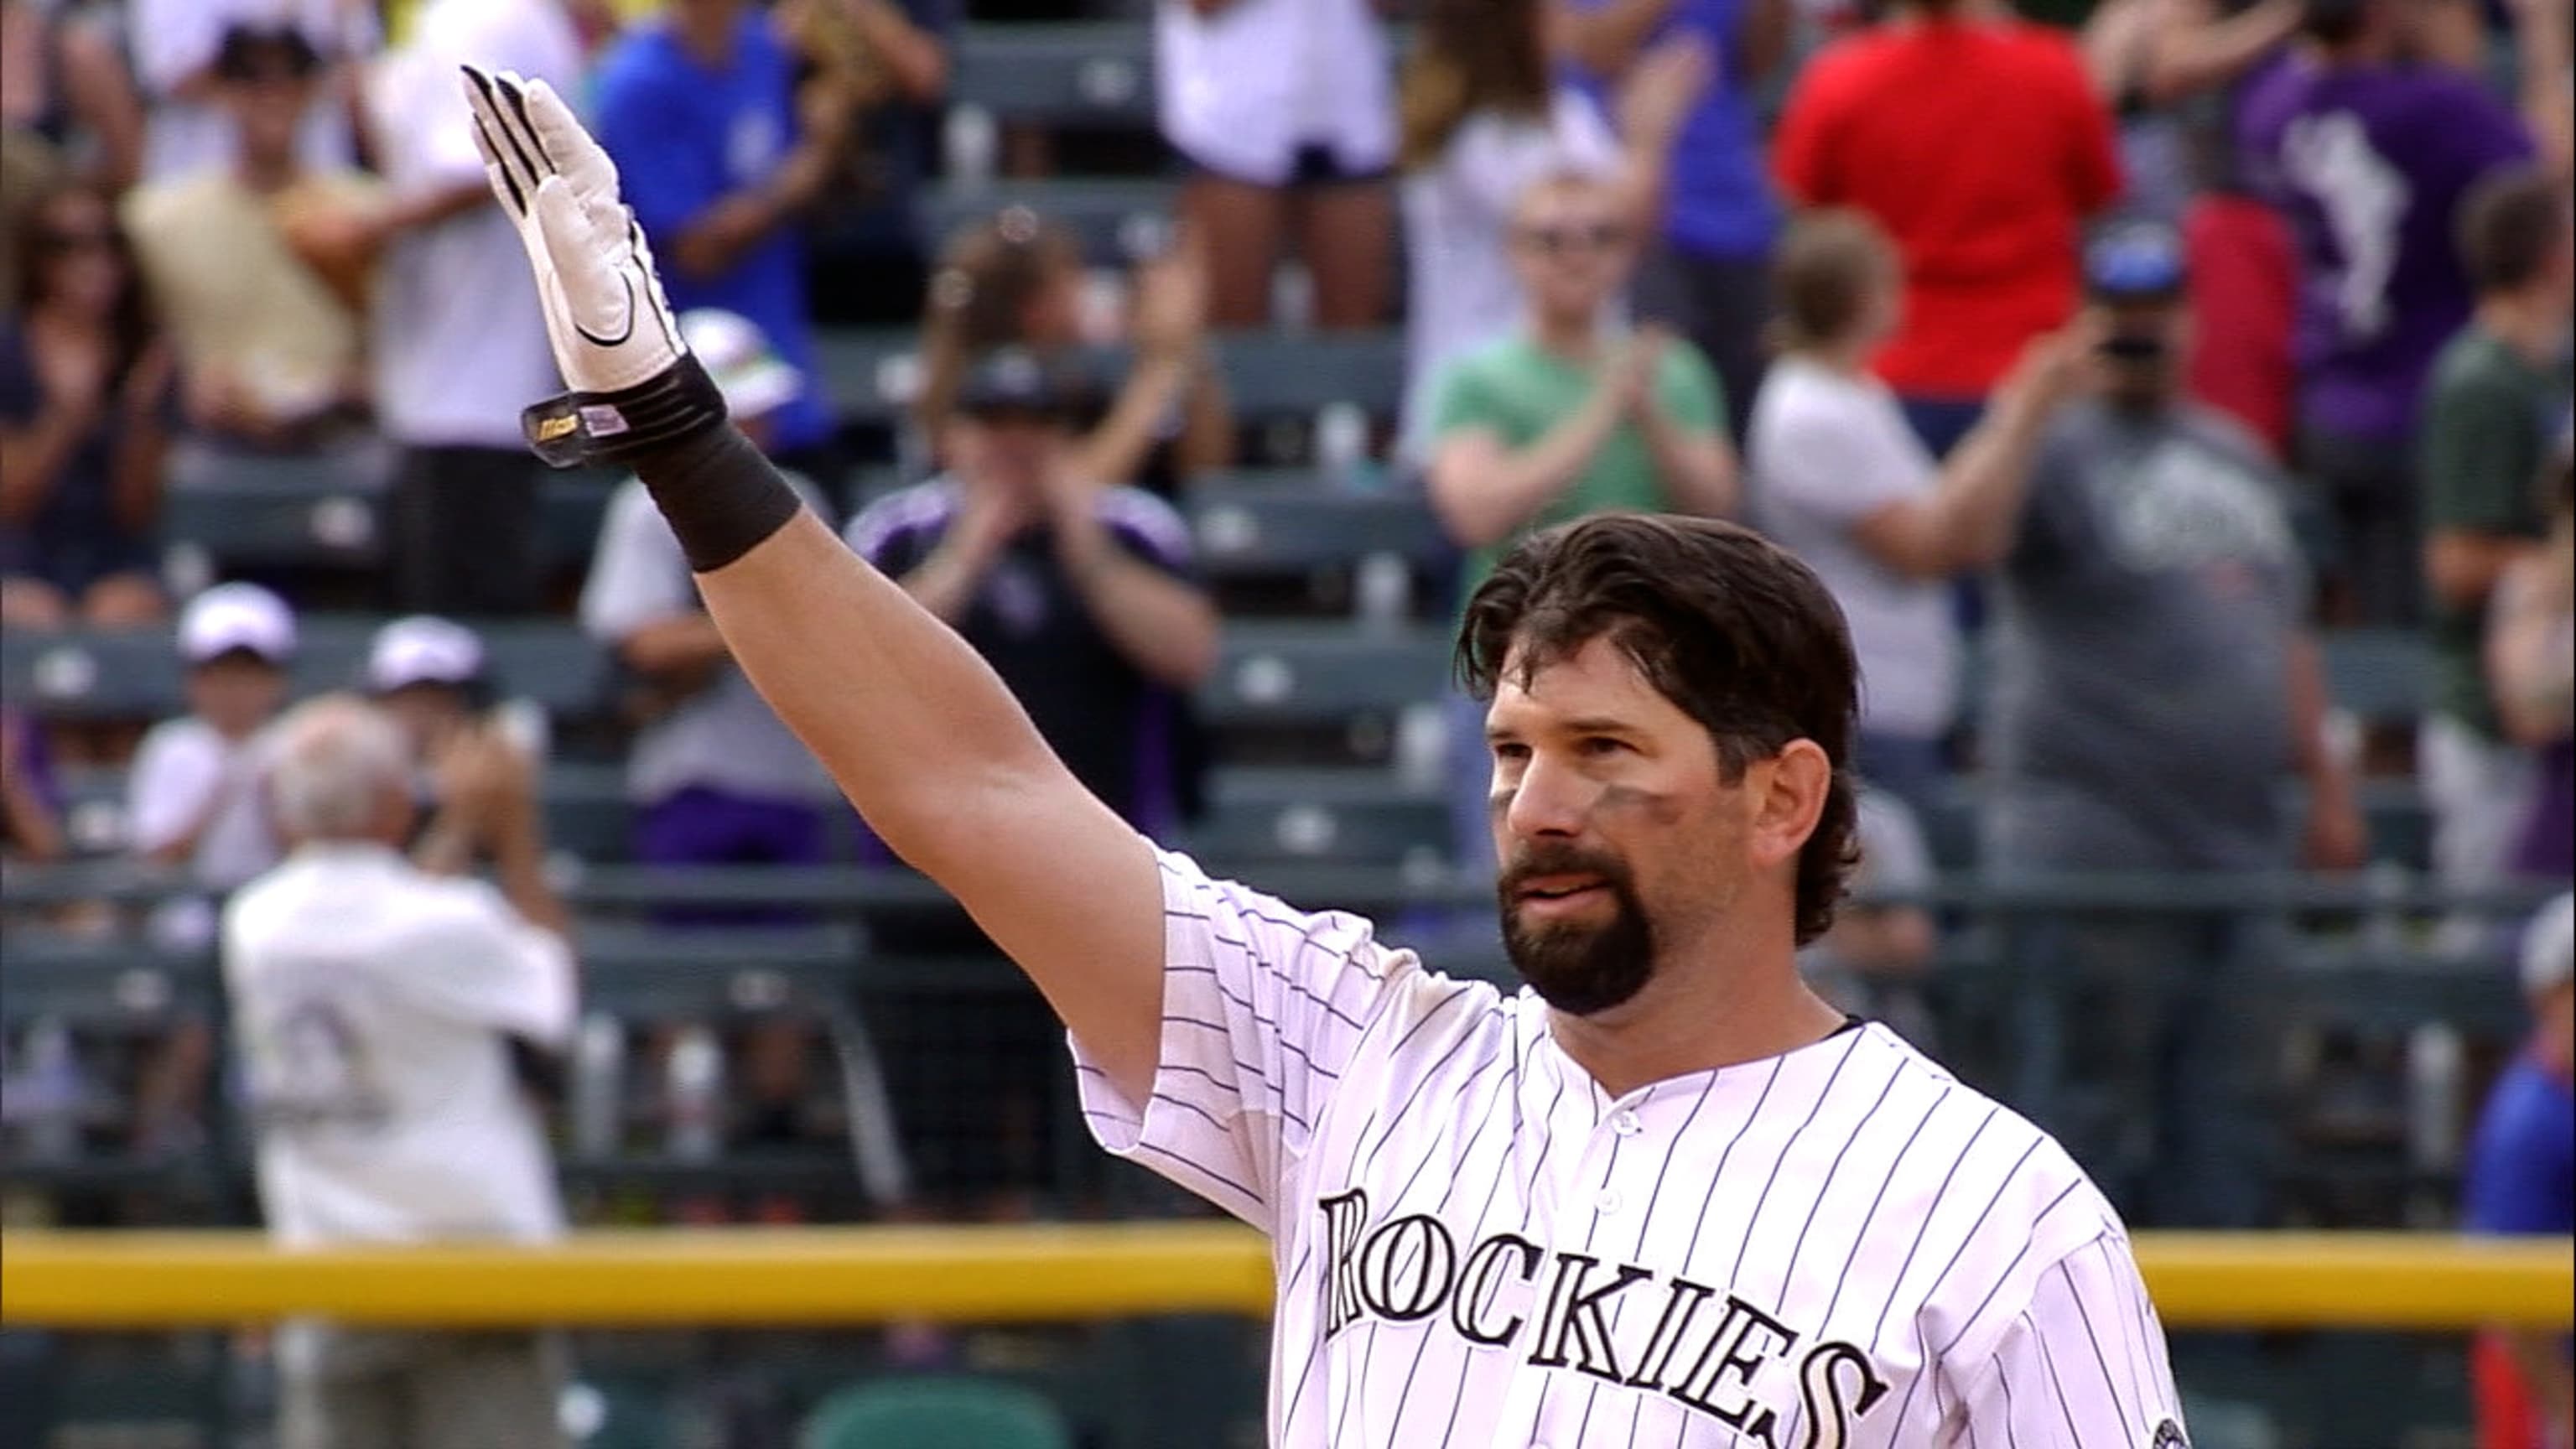 No Opening Day: Todd Helton, ex-Major Leaguers struggle with retirement